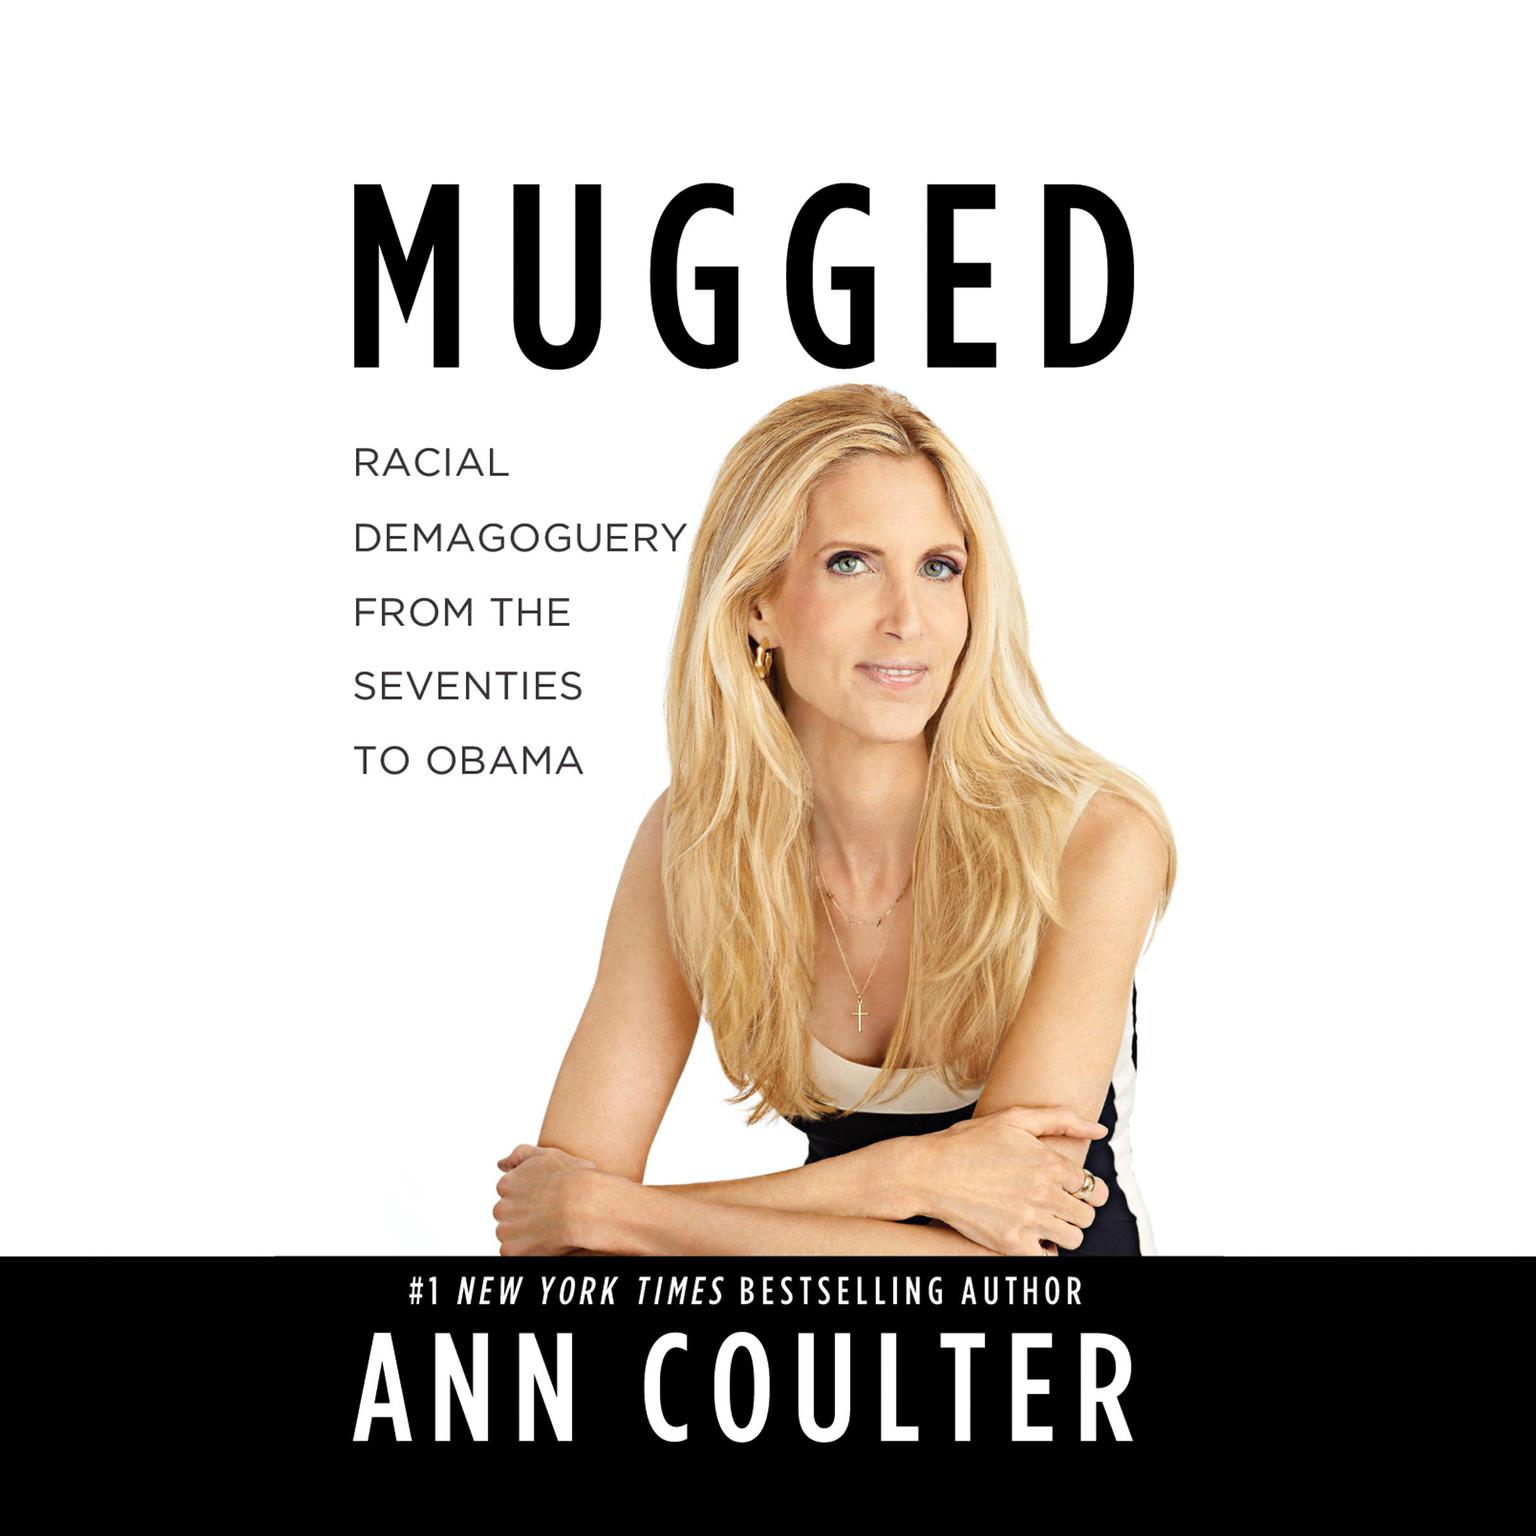 Mugged: Racial Demagoguery from the Seventies to Obama Audiobook, by Ann Coulter